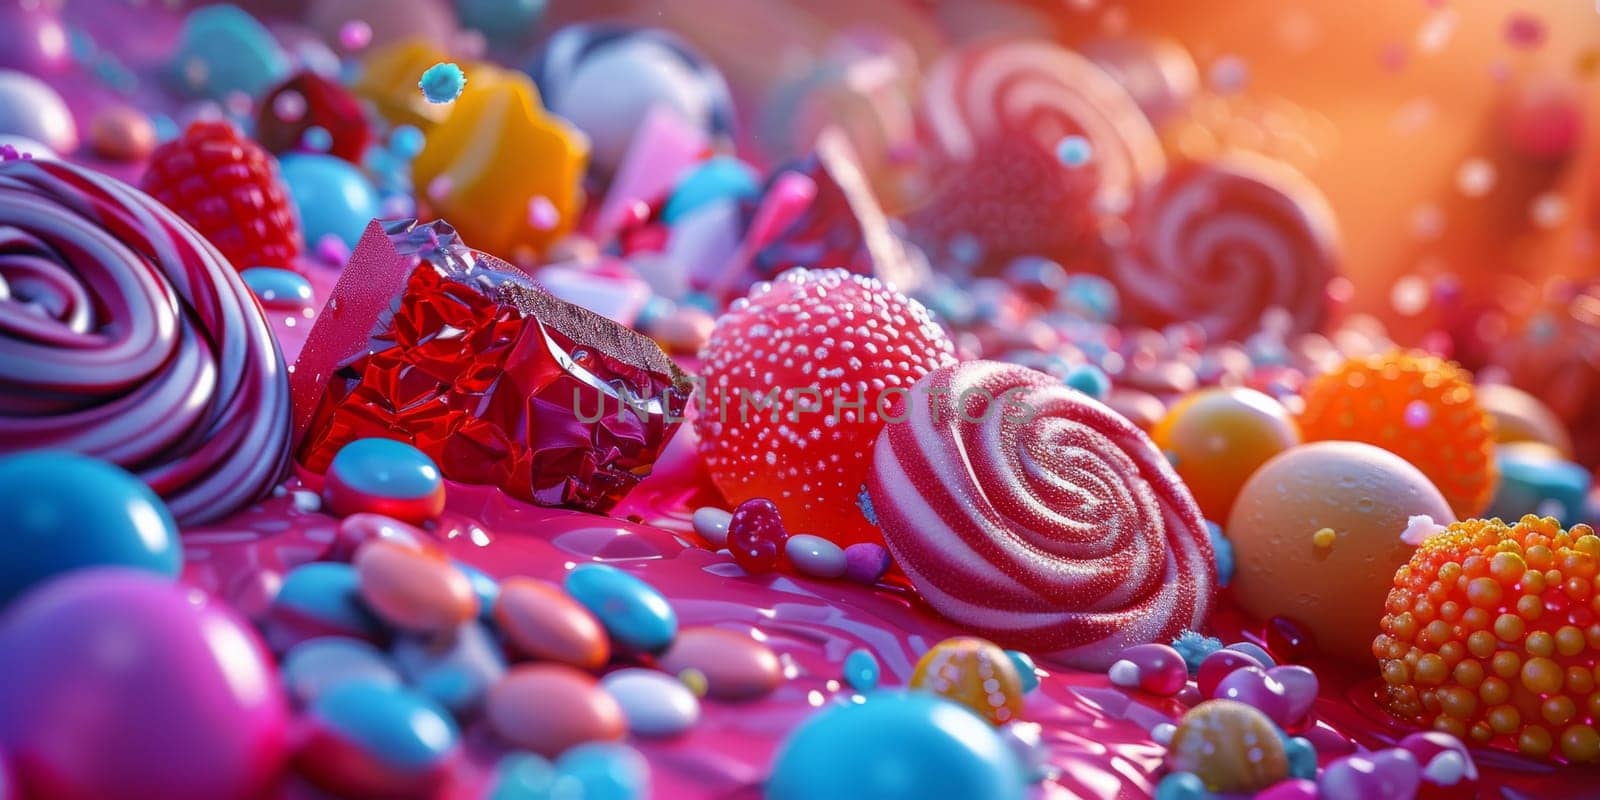 Detail to vibrant colors of candies, chocolates and other confectionery sweets by Kadula